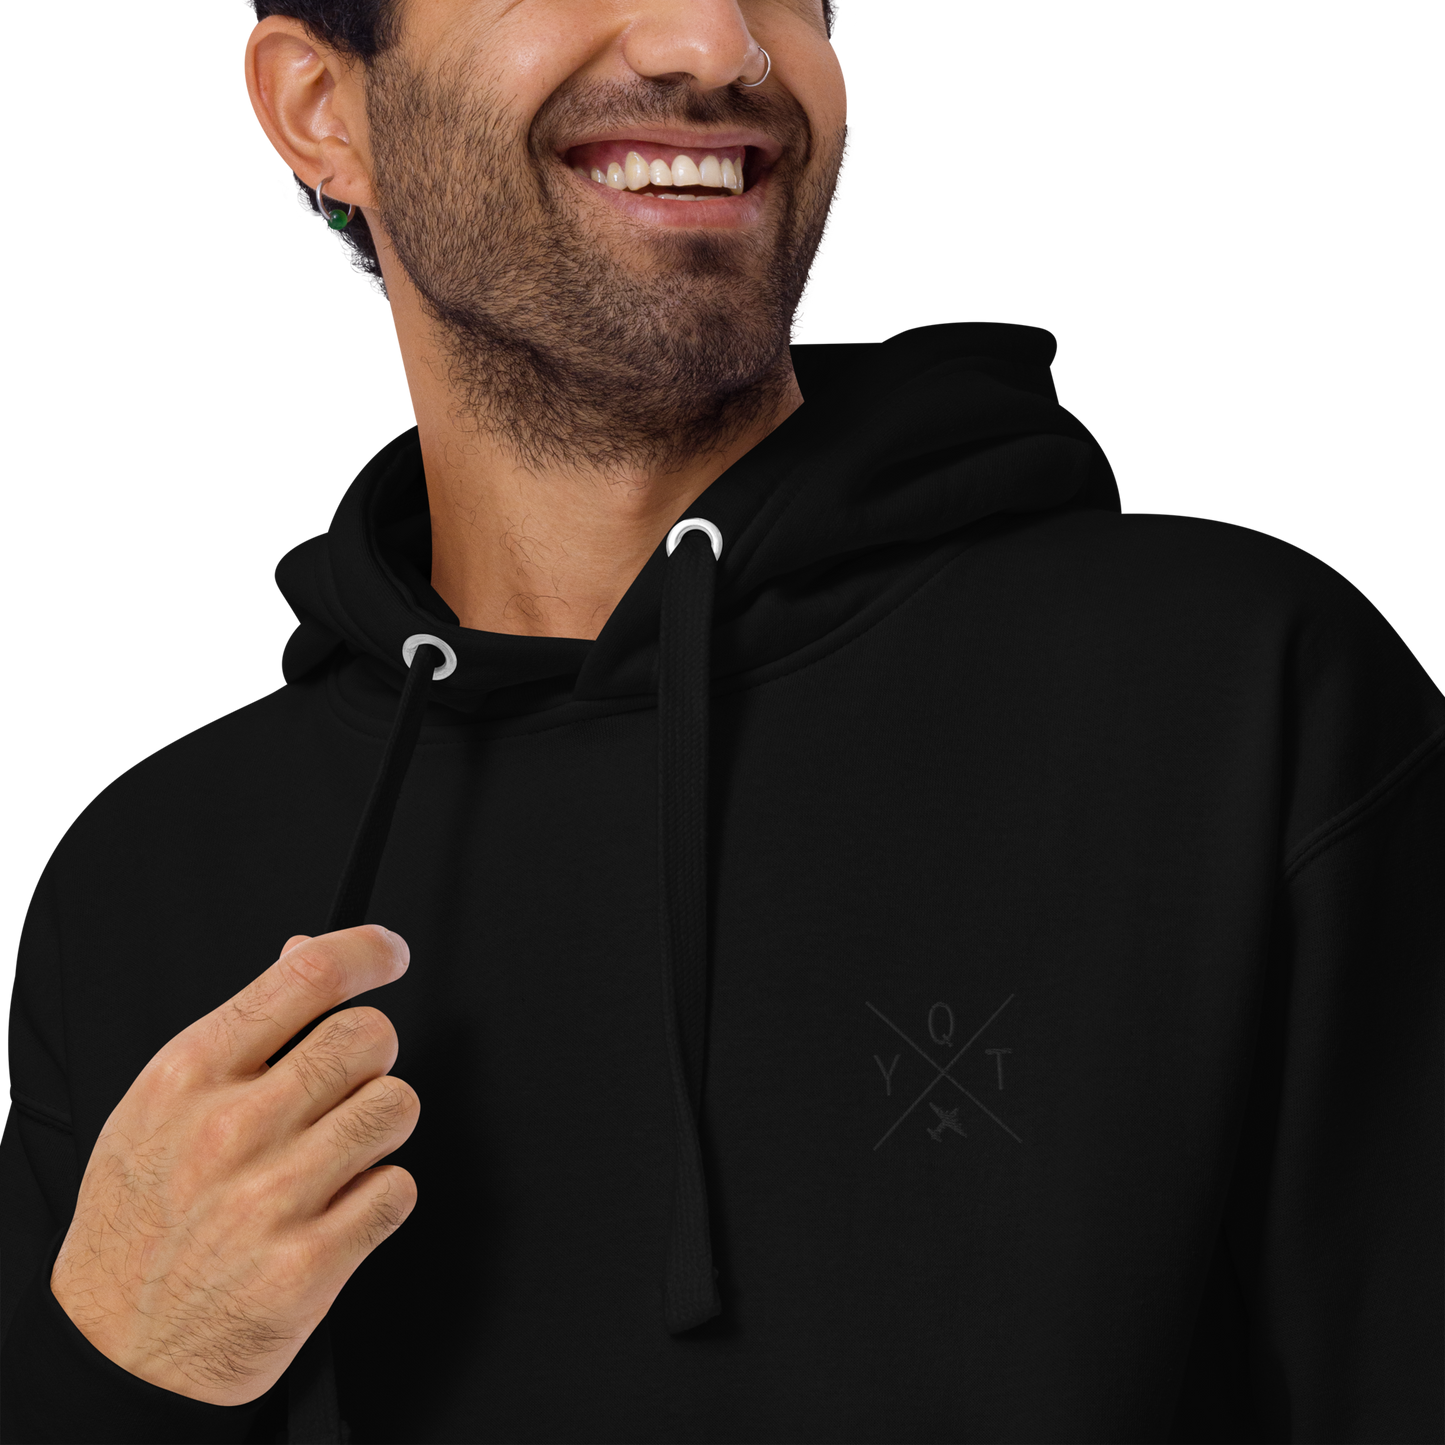 YHM Designs - YQT Thunder Bay Premium Hoodie - Crossed-X Design with Airport Code and Vintage Propliner - Black Embroidery - Image 10